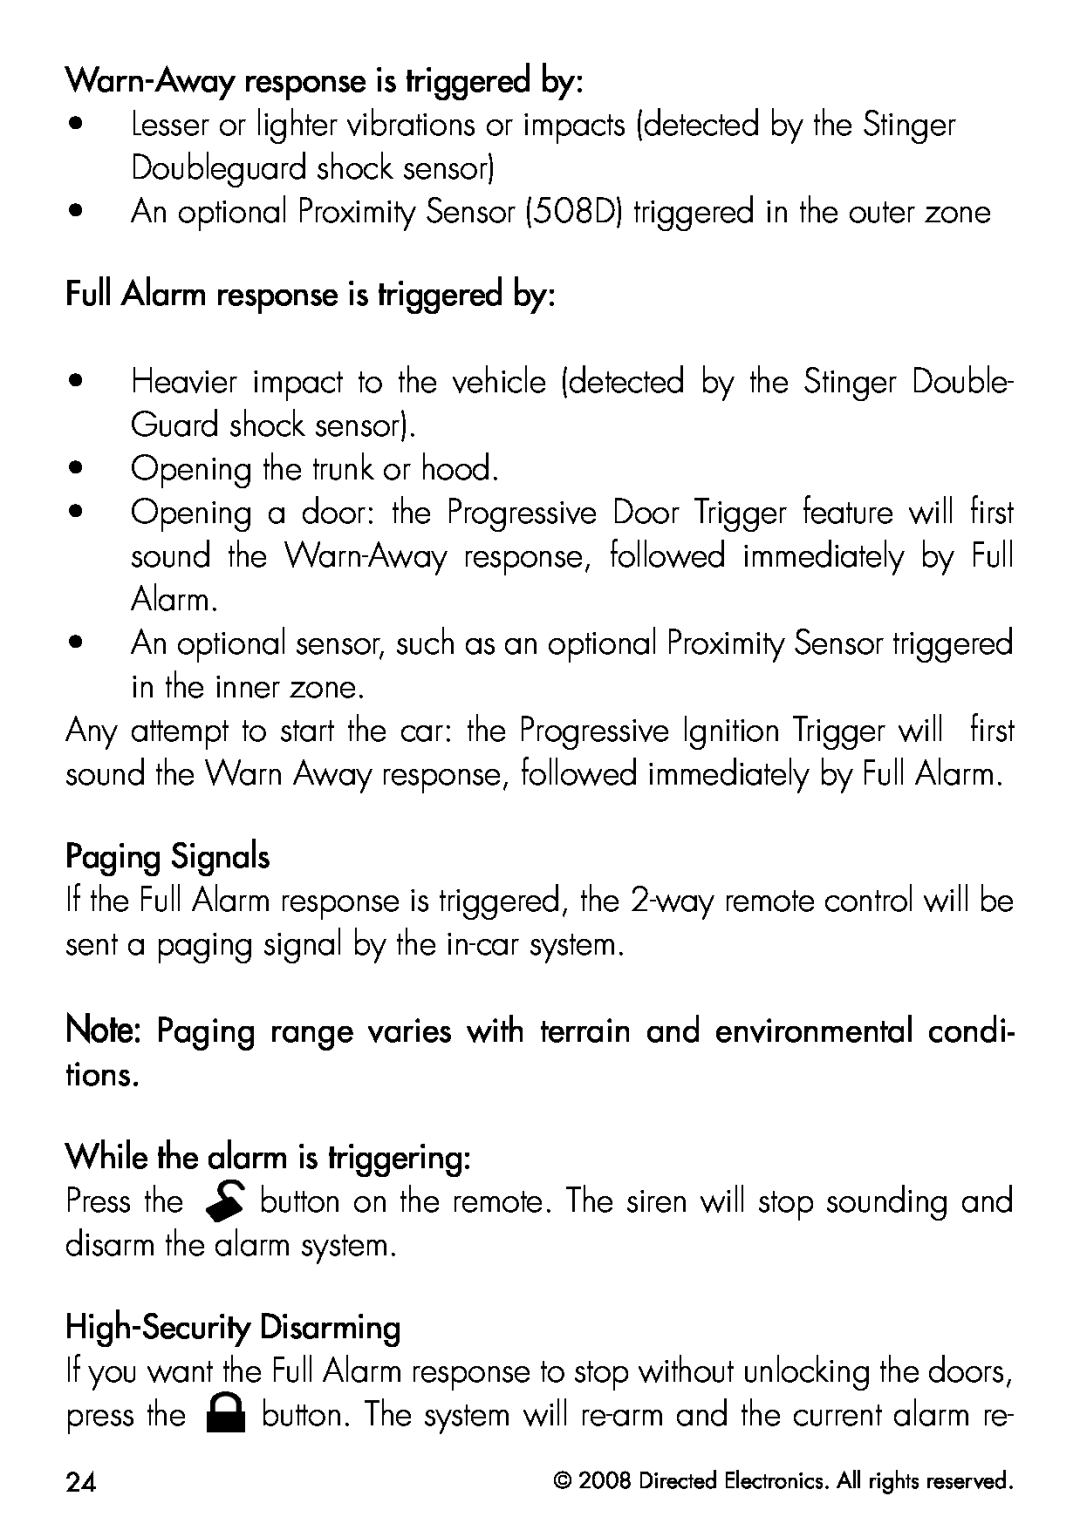 Viper 5901 manual Warn-Away response is triggered by 